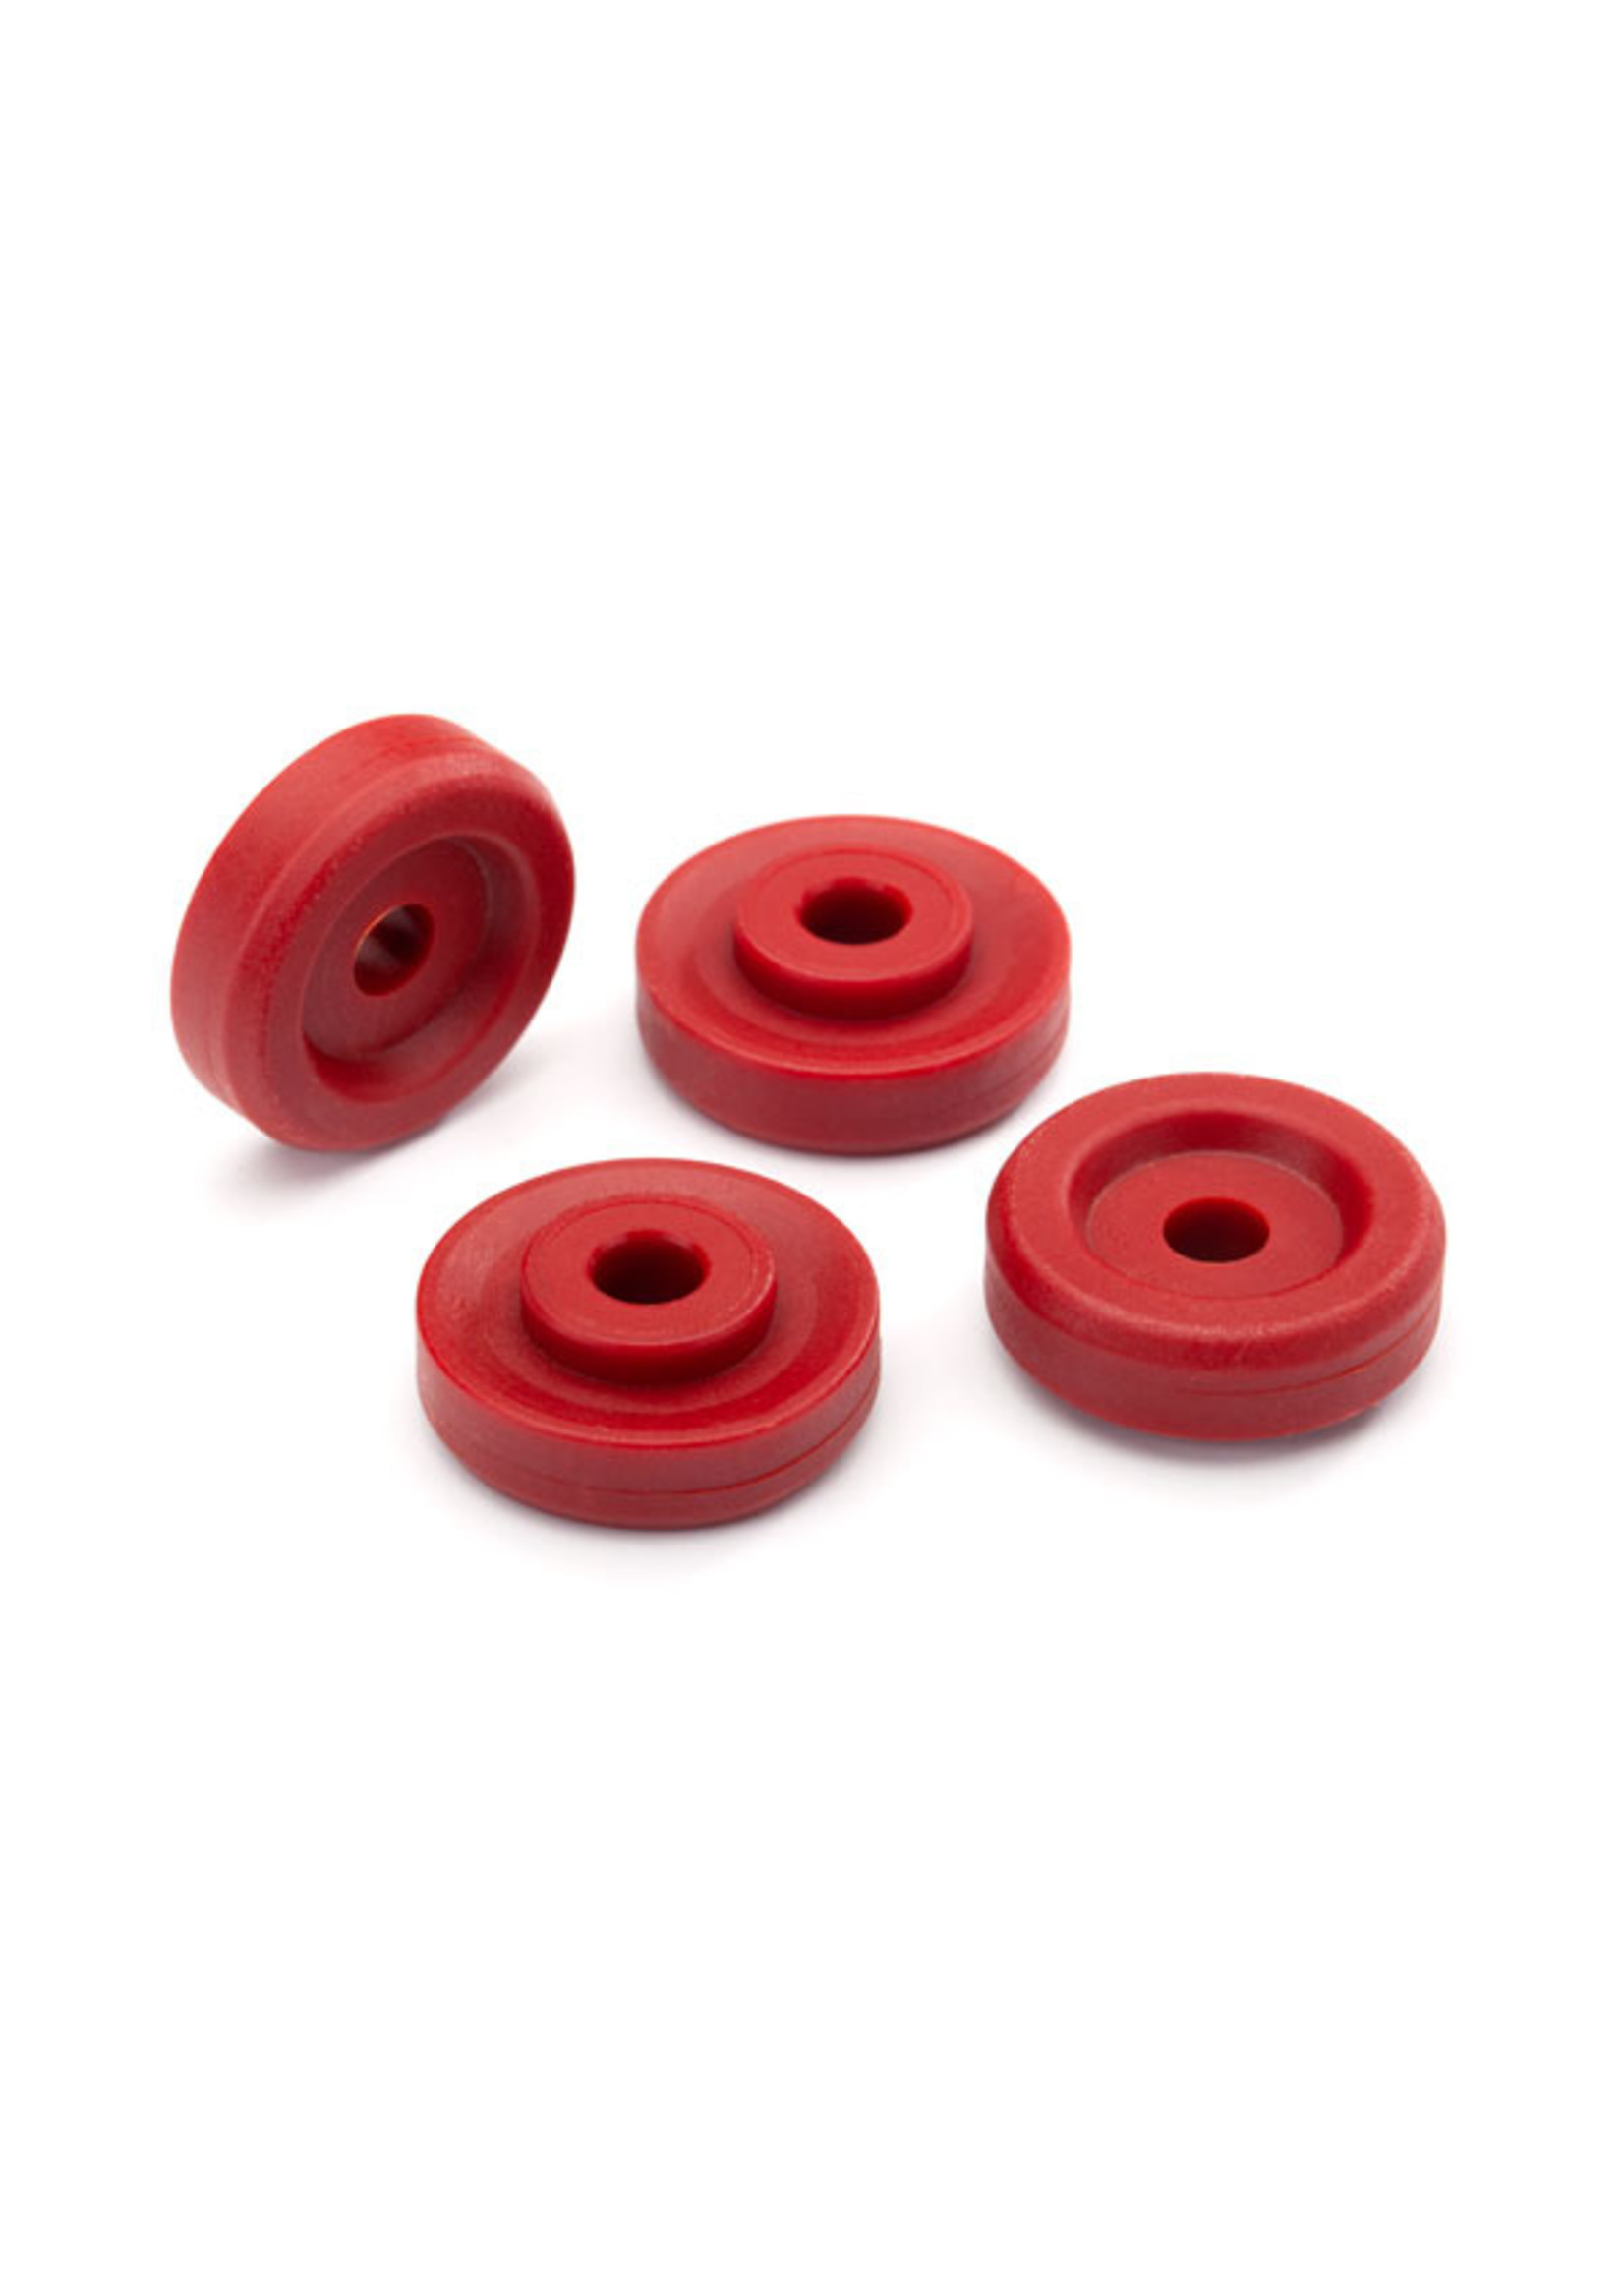 Traxxas 8957R - Wheel Washers - Red